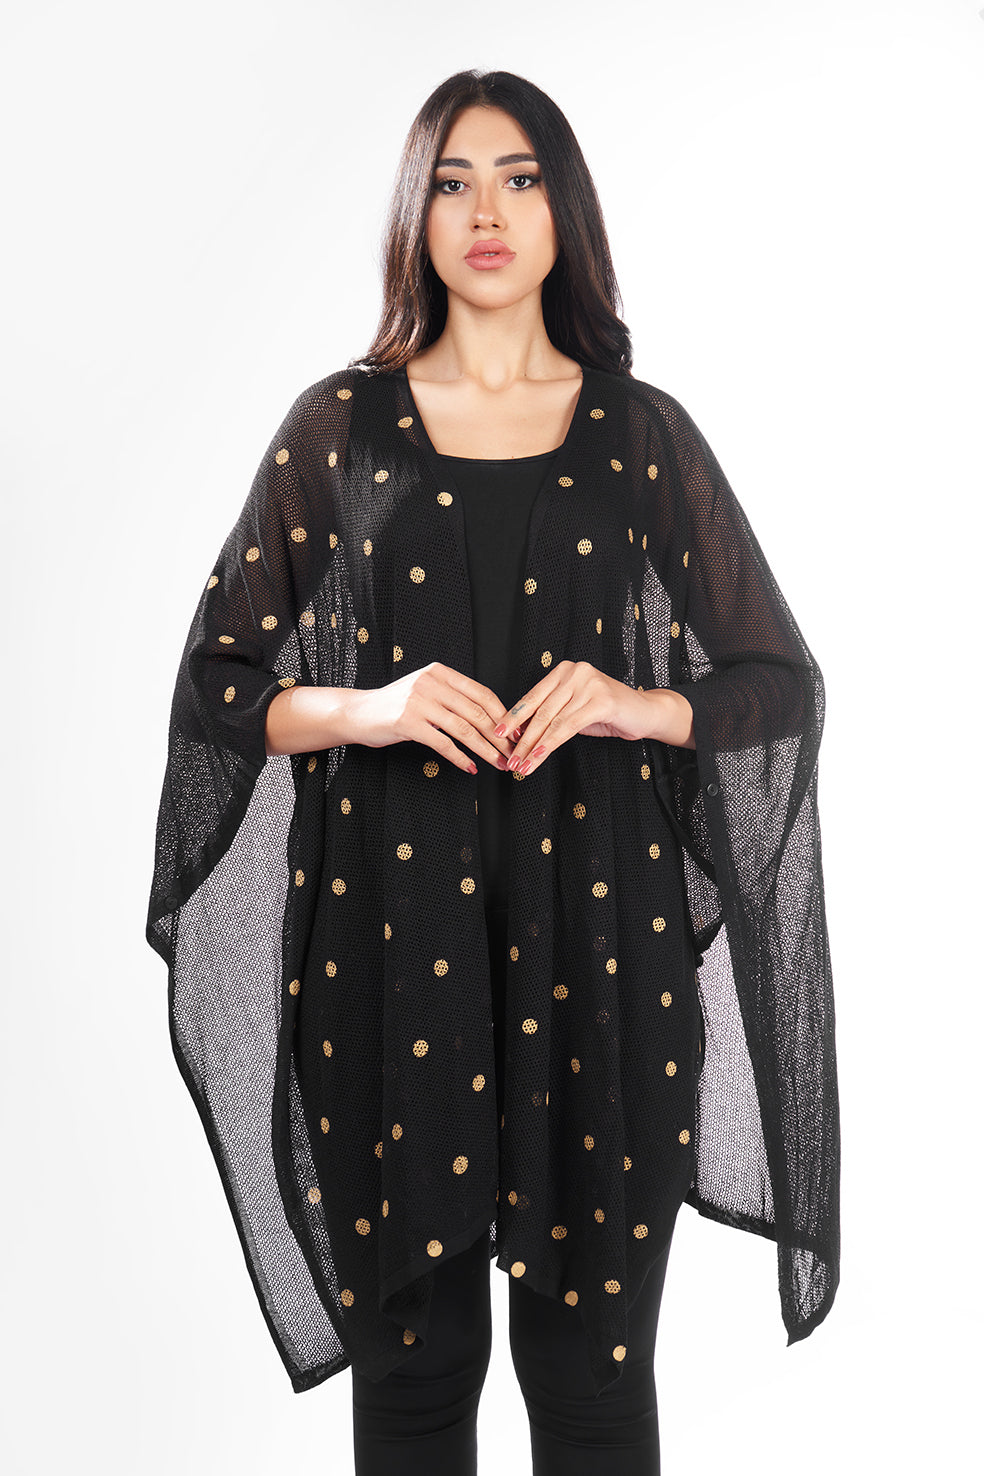 ONE SIZE, LOOSE FIT, KNITWEAR PONCHO, WITH A GOLD OXIDE POLKADOT PATTERN